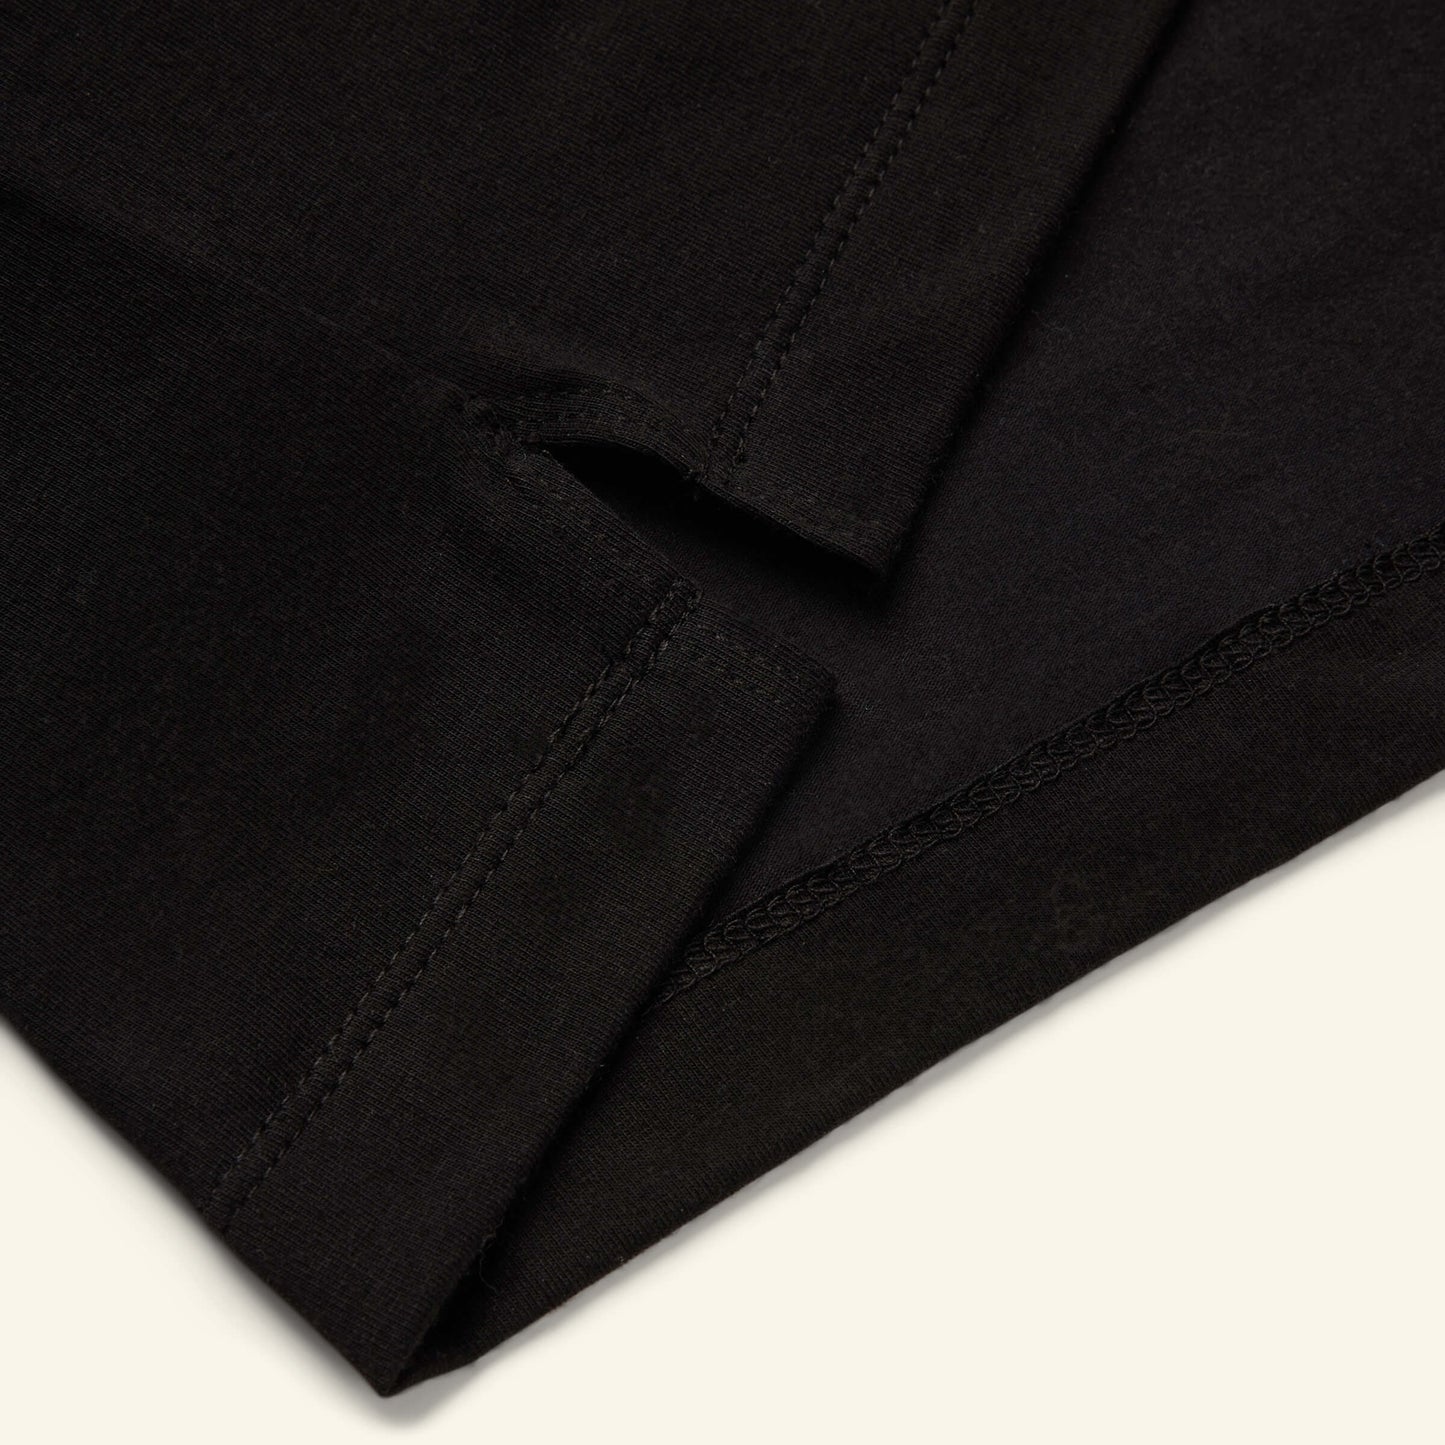 Detailed view of the Slumber Cloud Essential Pocket Tee made with Outlast temperature regulation technology